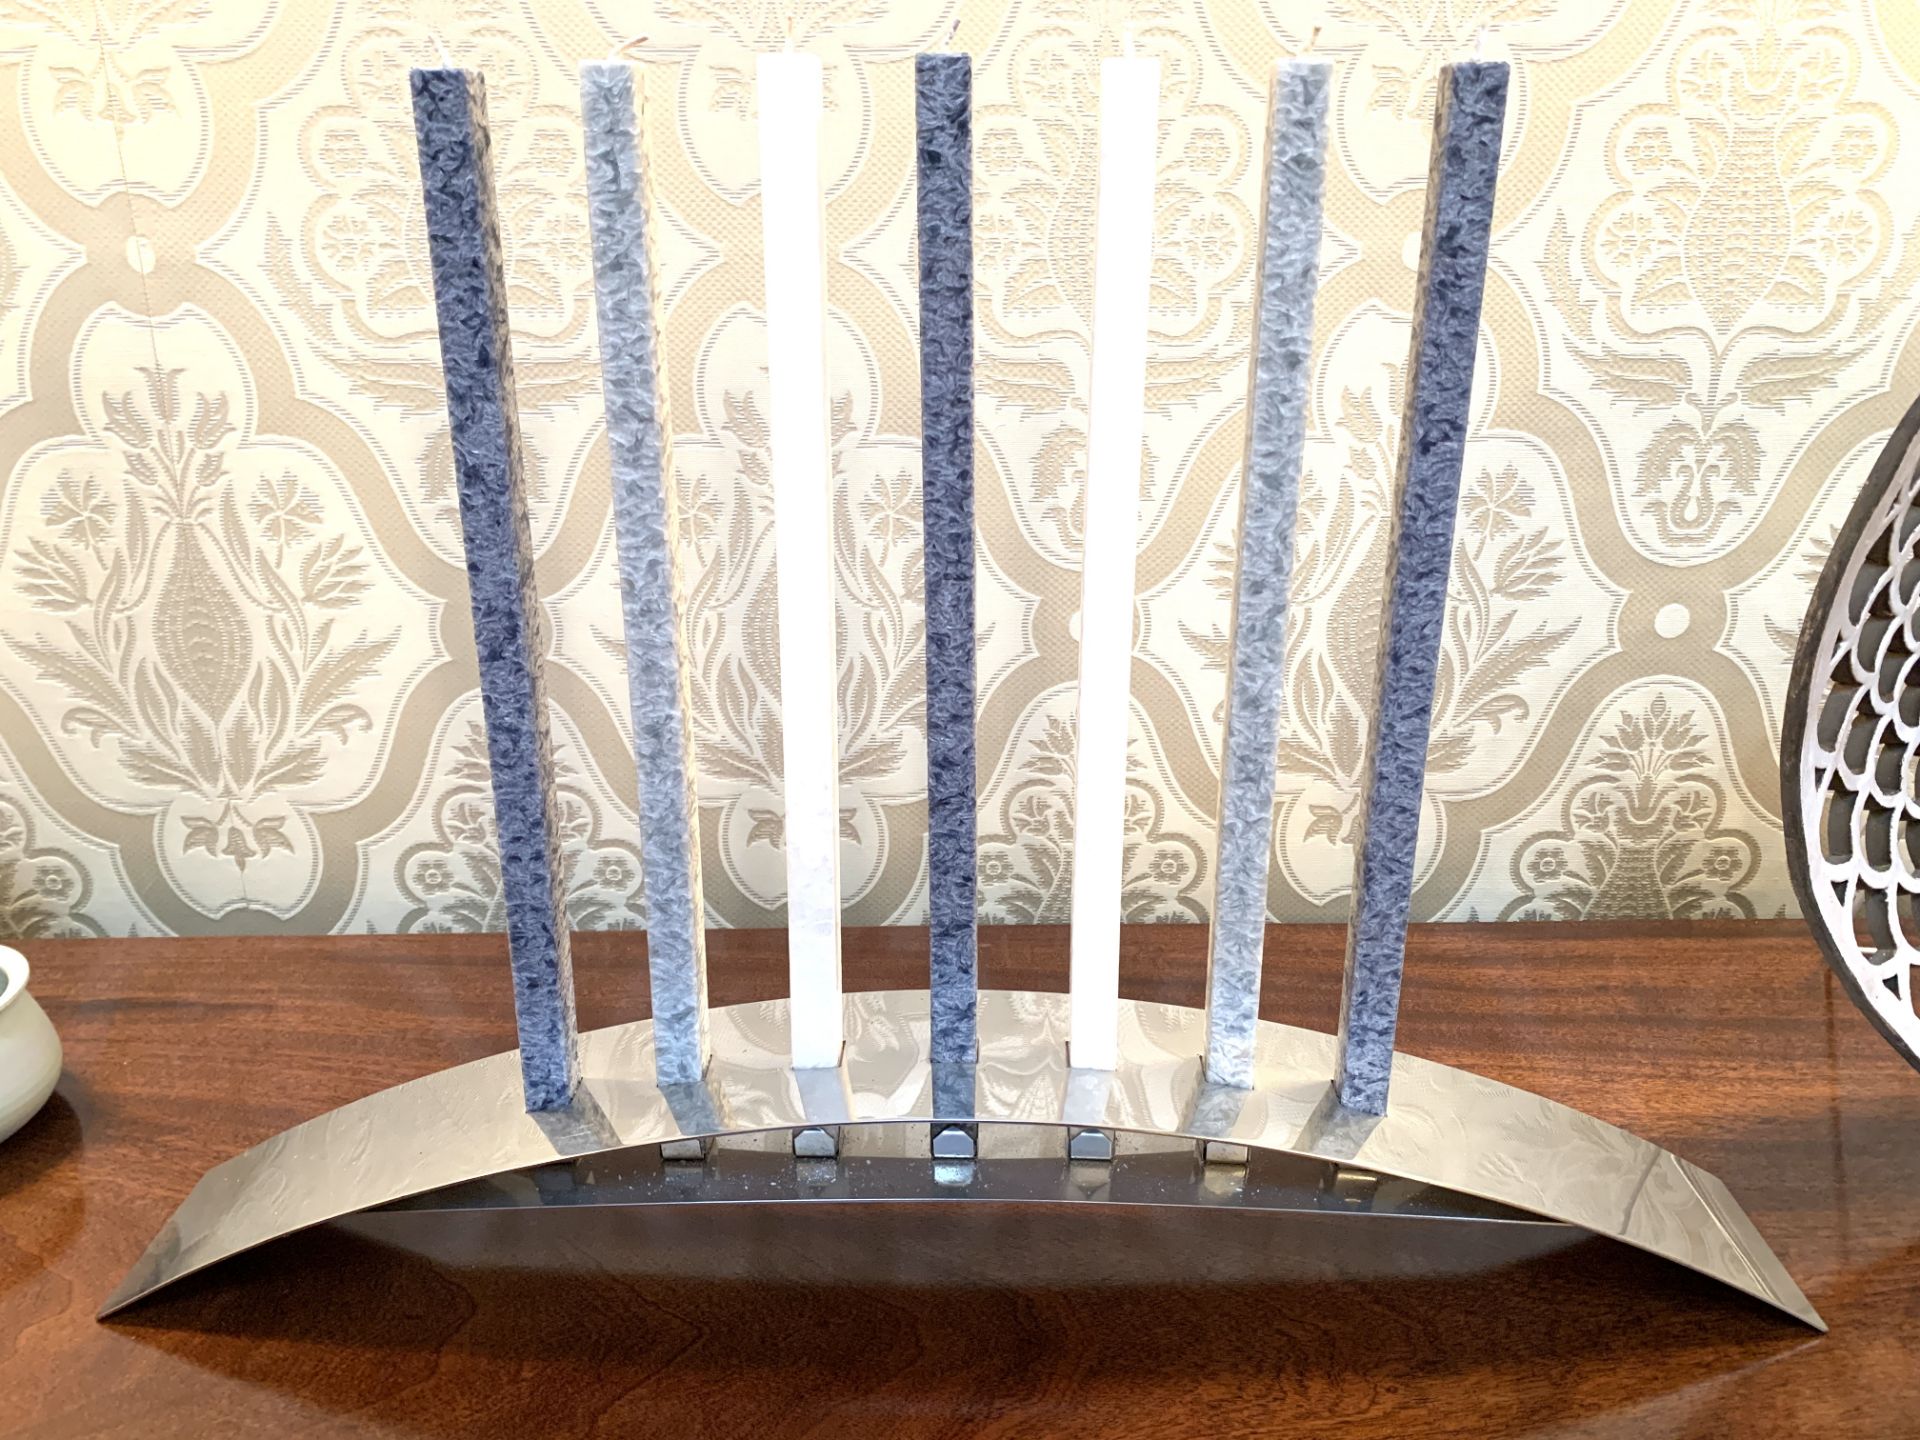 Chrome curved candle holder and candles